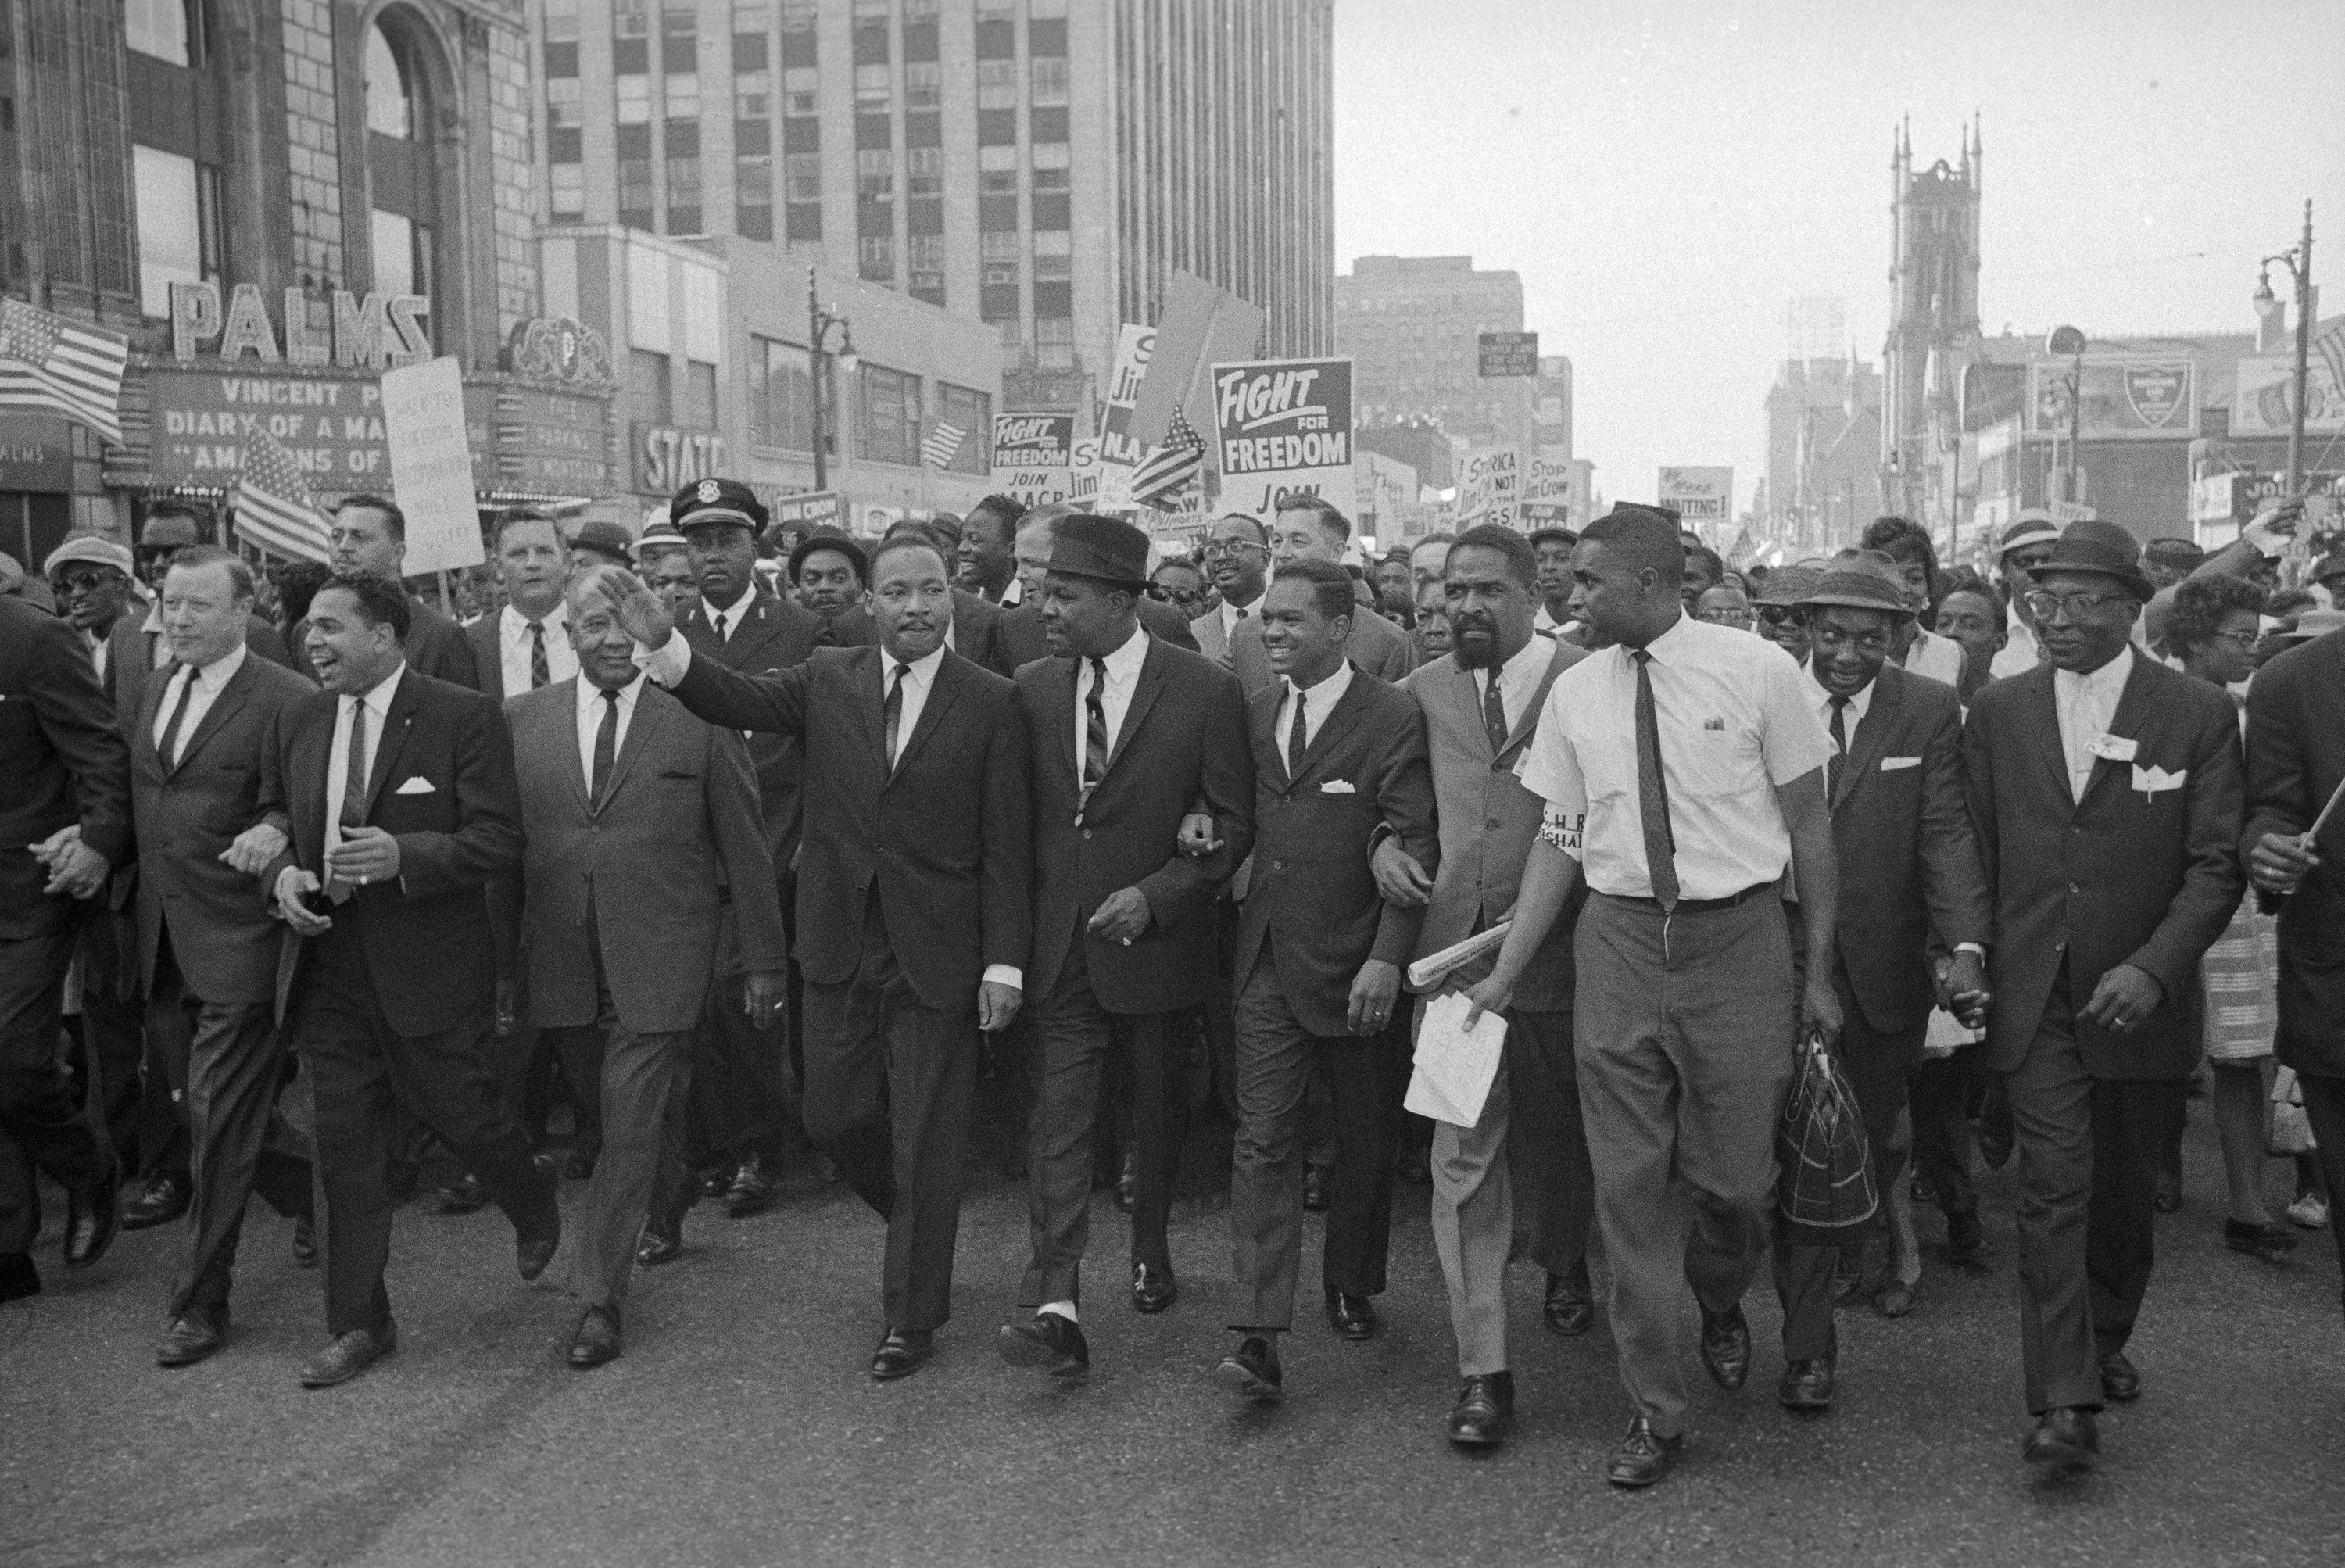 Dr. King marches